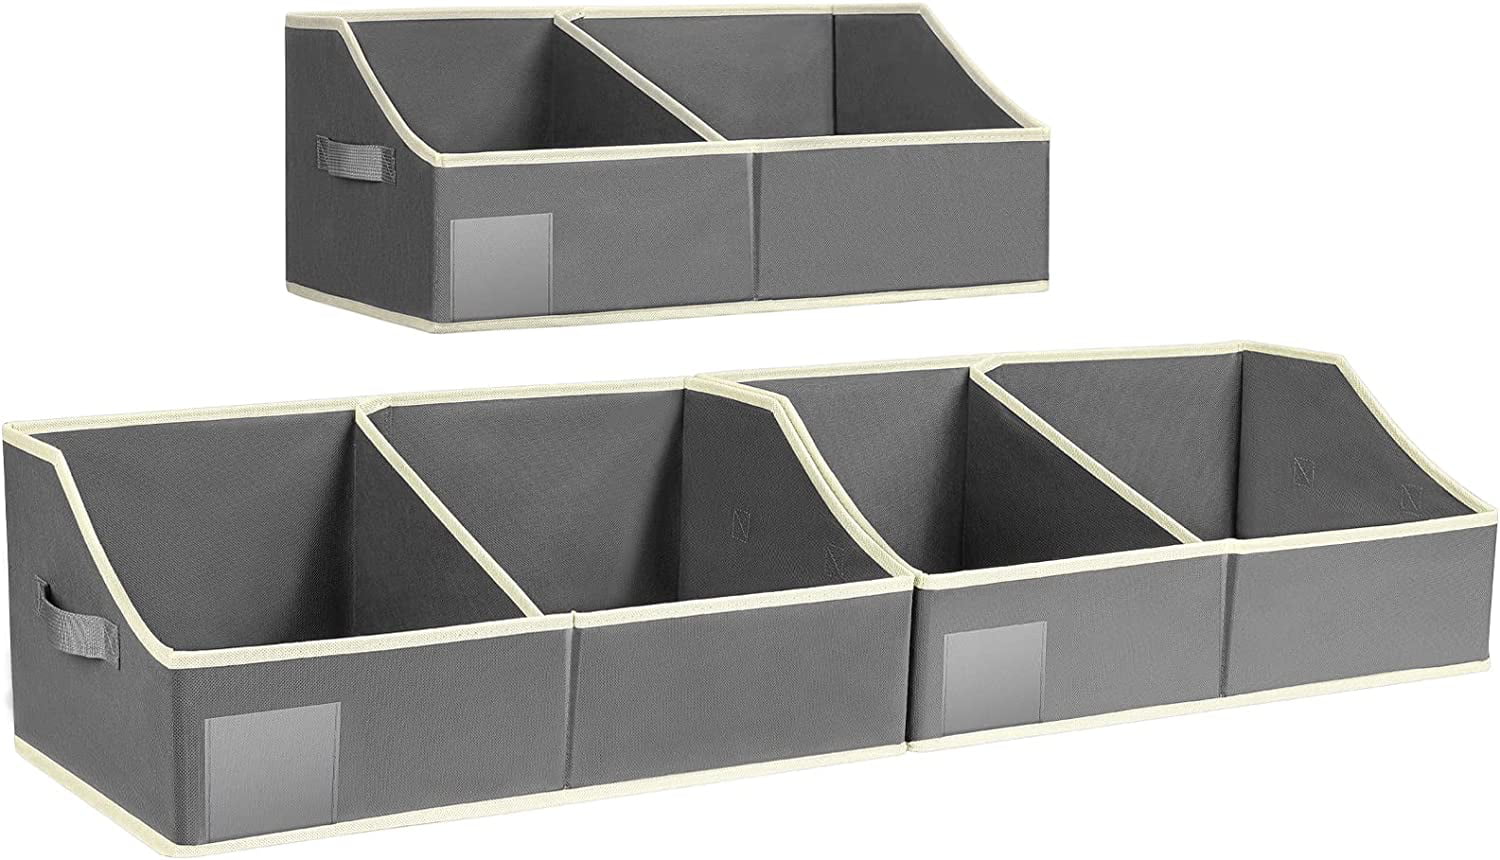 Trapezoid Large Storage Box Foldable Fabric Baskets for Organizing Clothes Toys Towel Book DVD 3 Packs Closet Storage Bins Dark Grey, 20 x 11.2 x 8.3 inches Baby Toiletry 